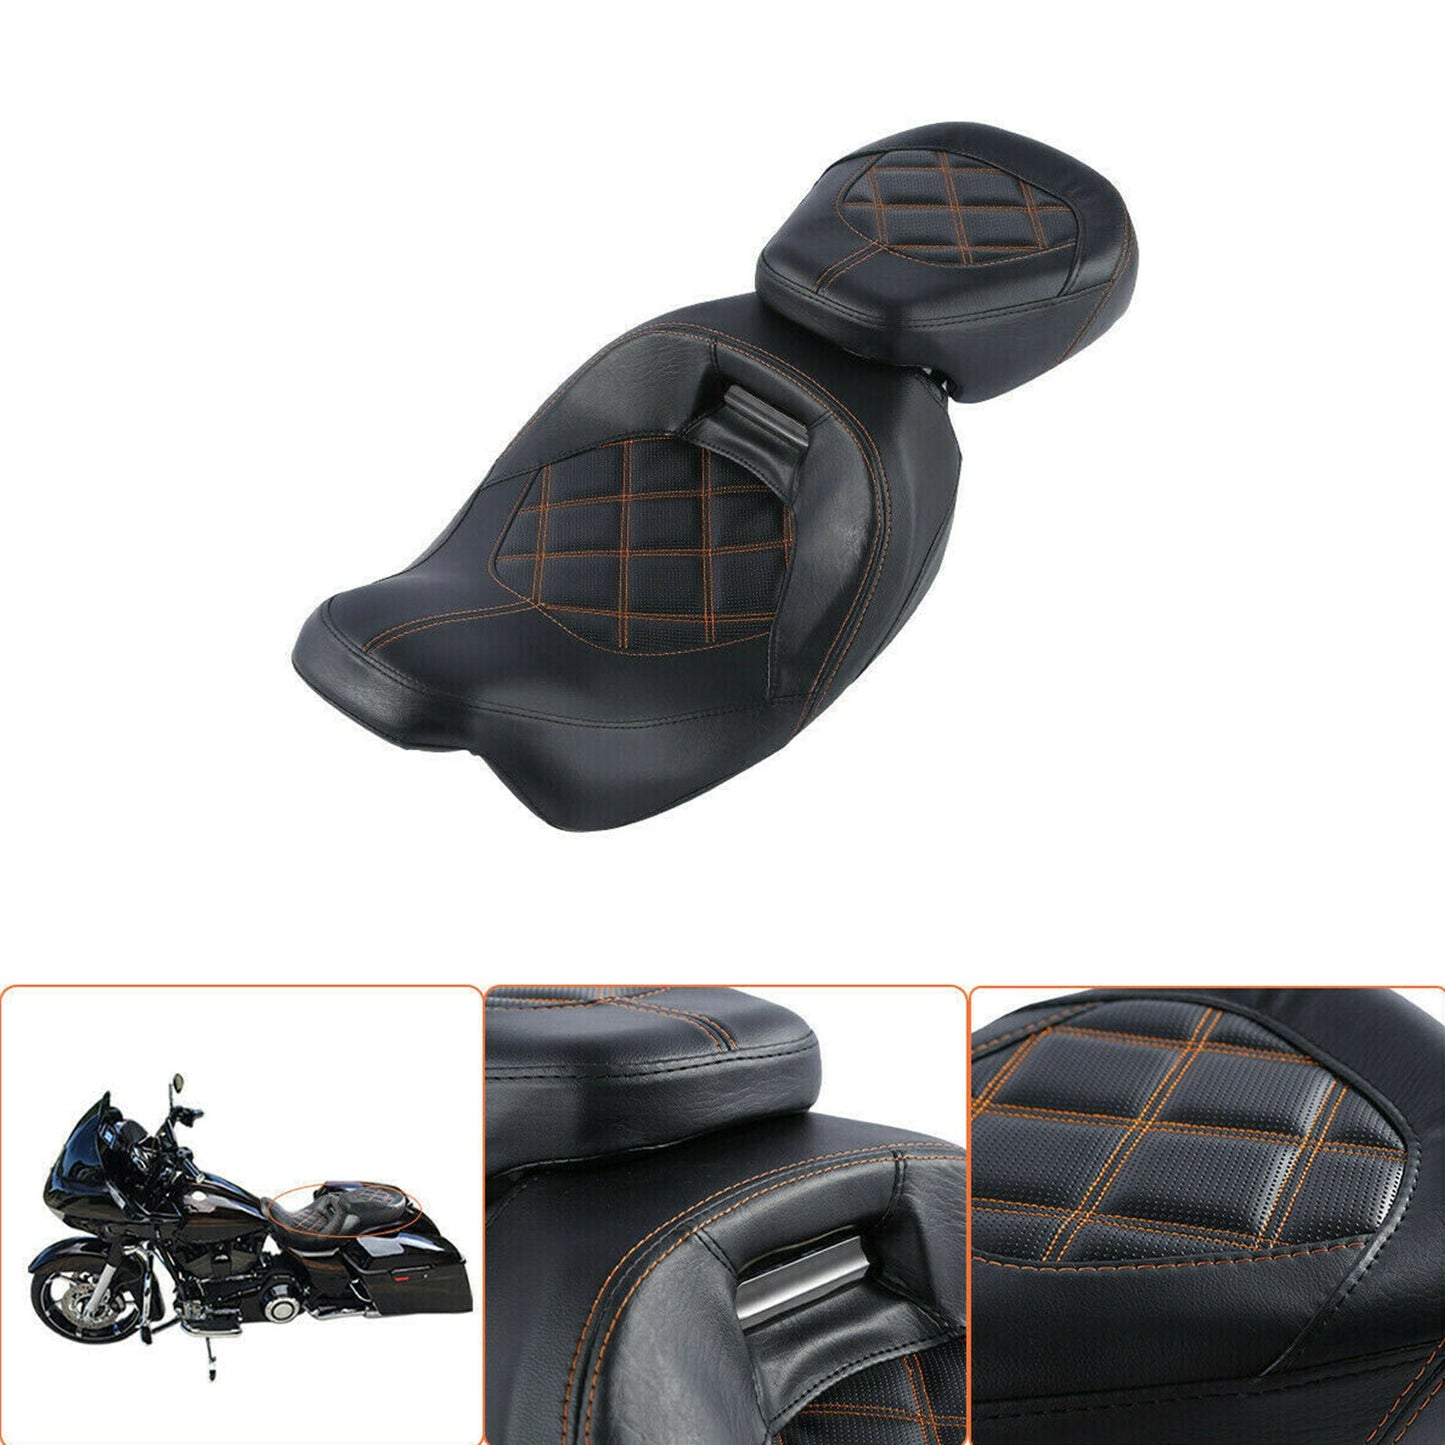 Driver Passenger Seat Fit For Harley Cvo Touring Road Glide Fltr 2009-2021 2020